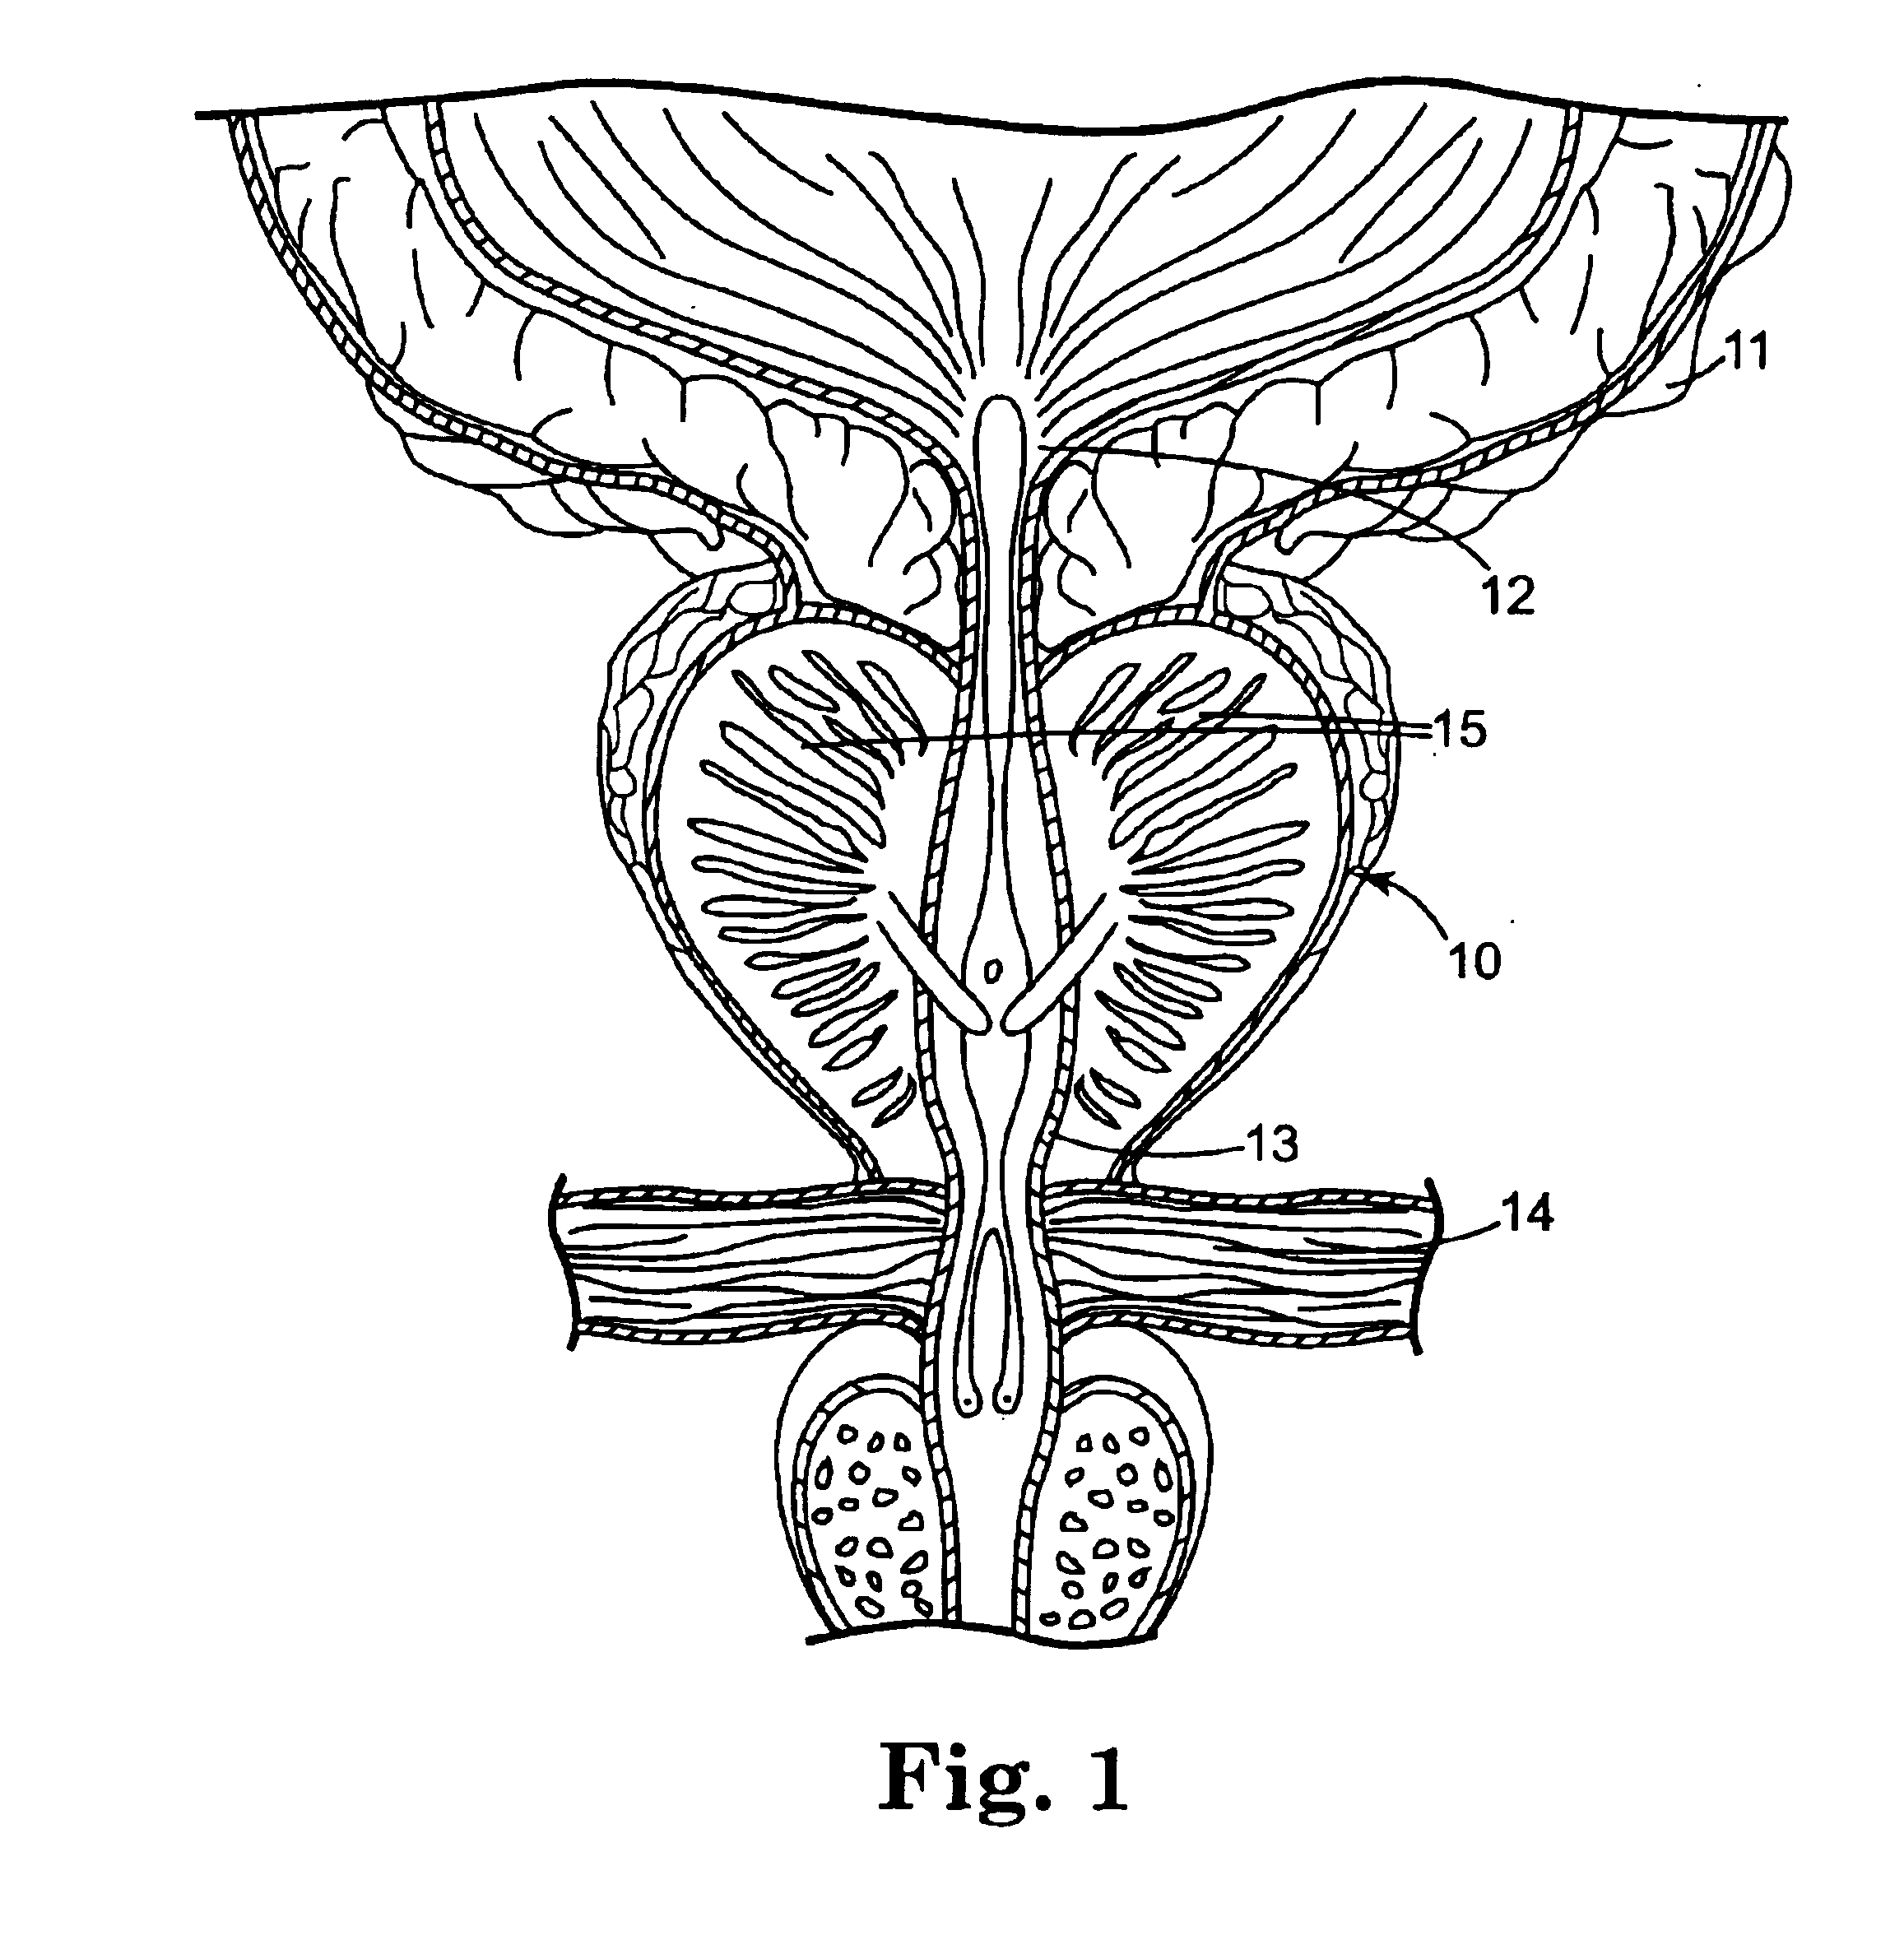 Method of injecting a drug and echogenic bubbles into prostate tissue